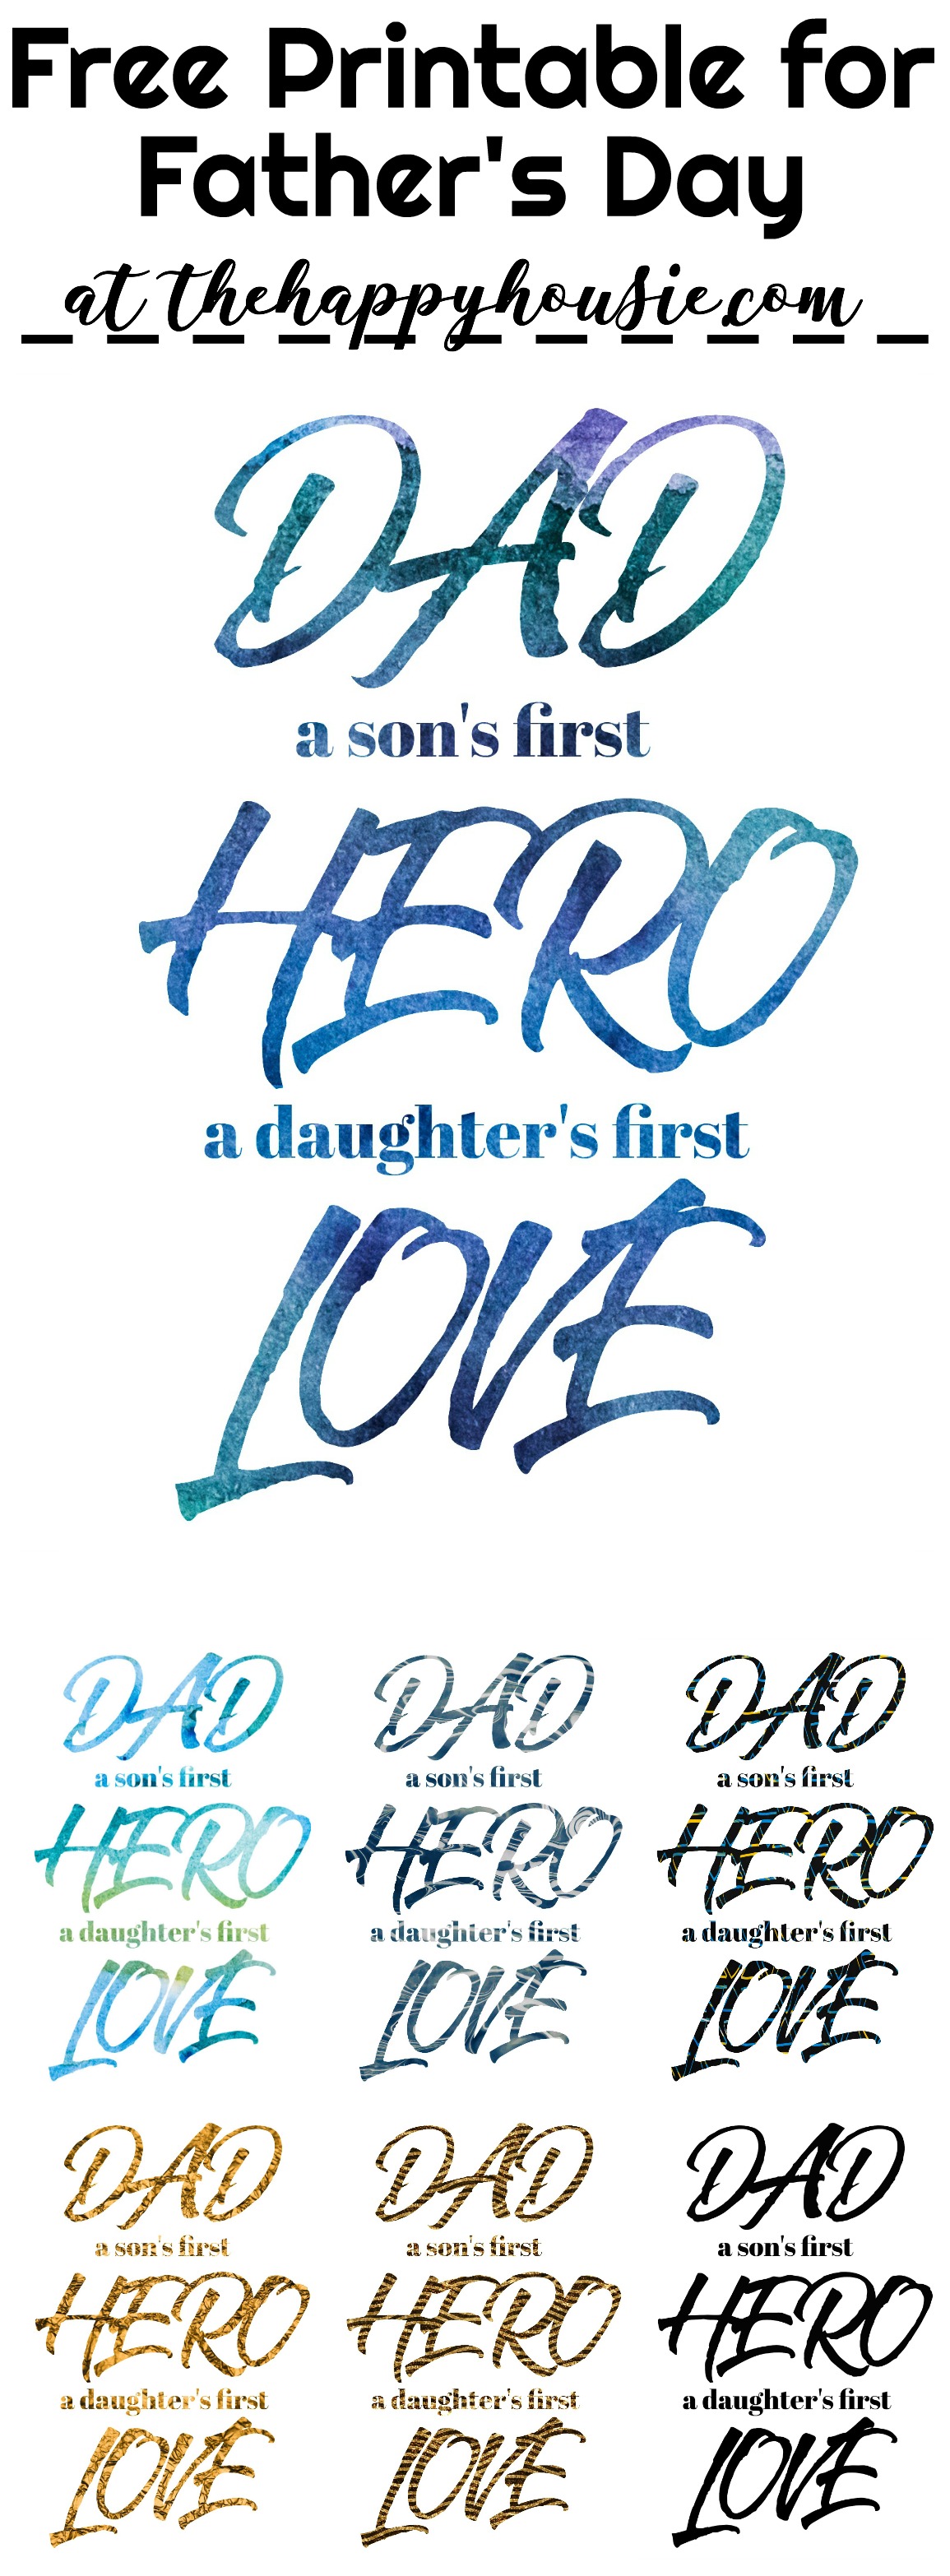 The free printable for Dad.